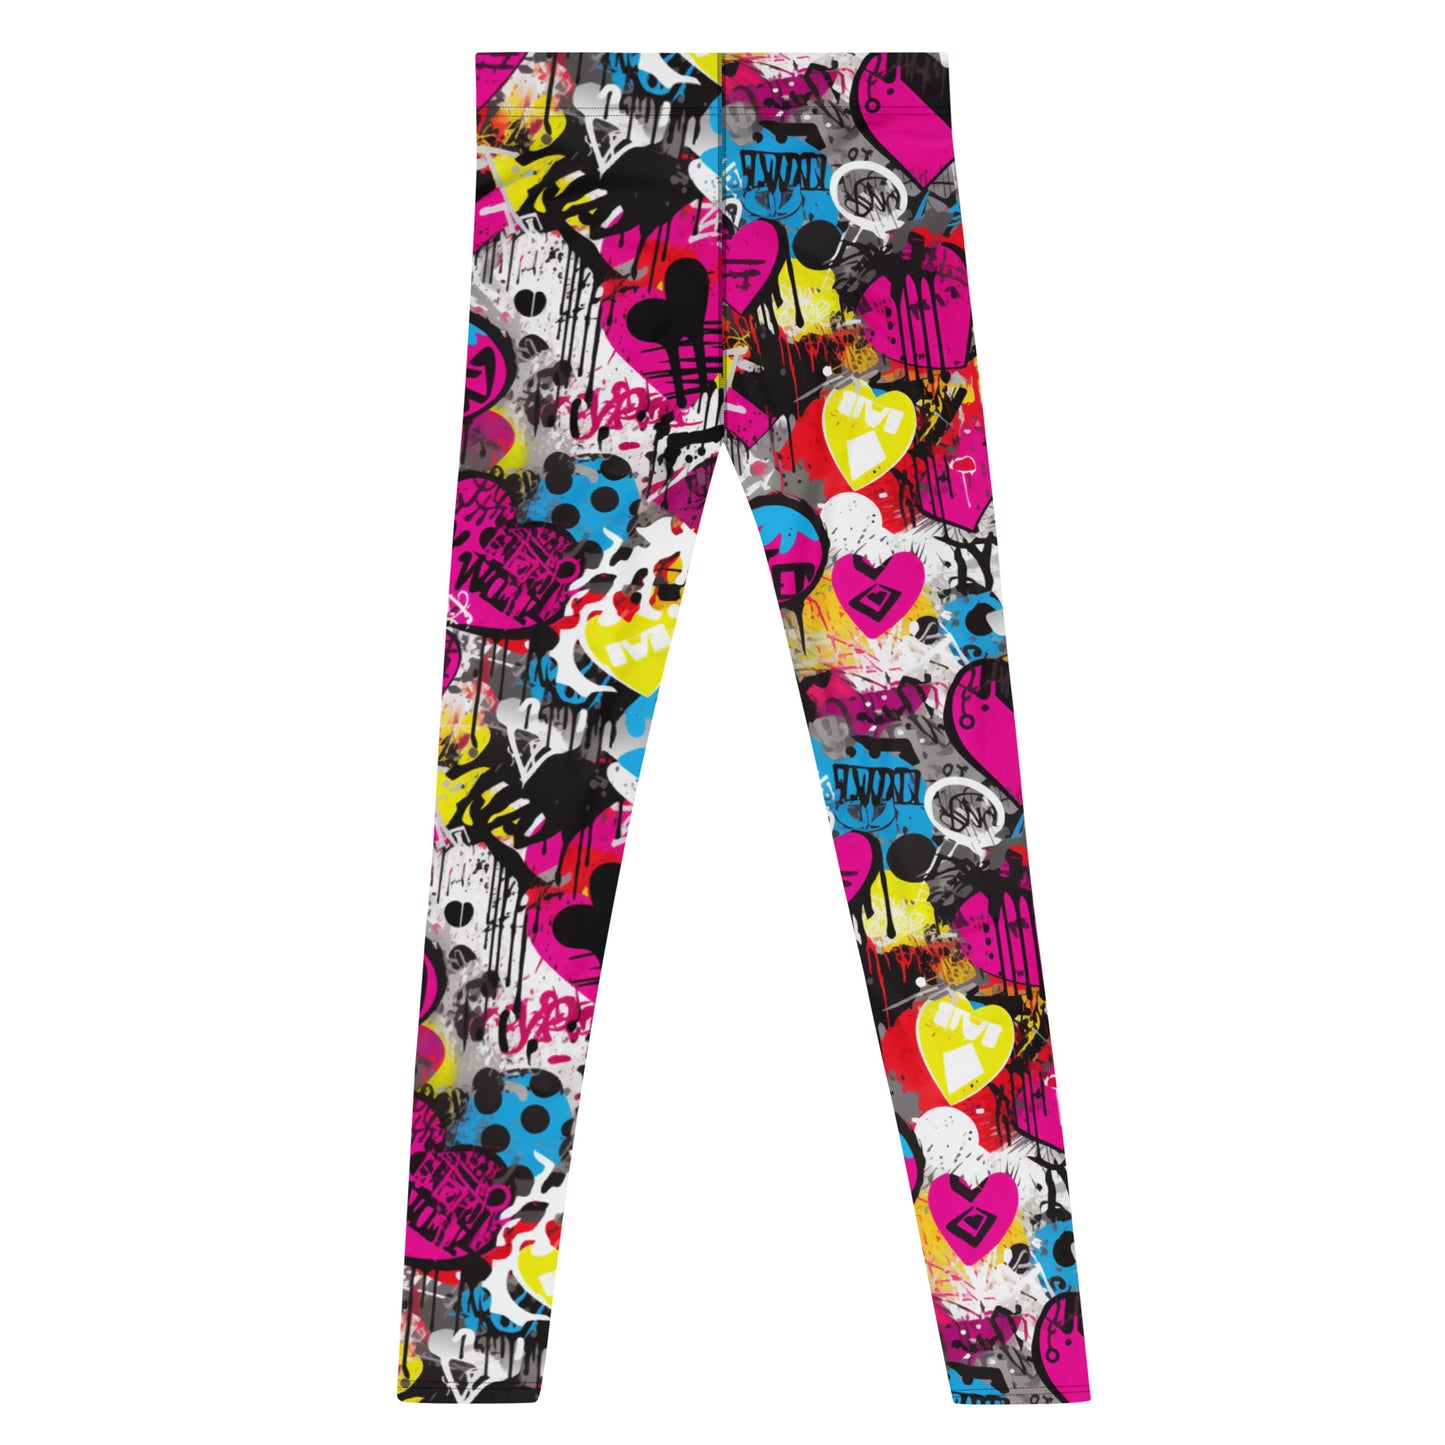 Men's all-over print leggings with white background, full-front view alternate angle.